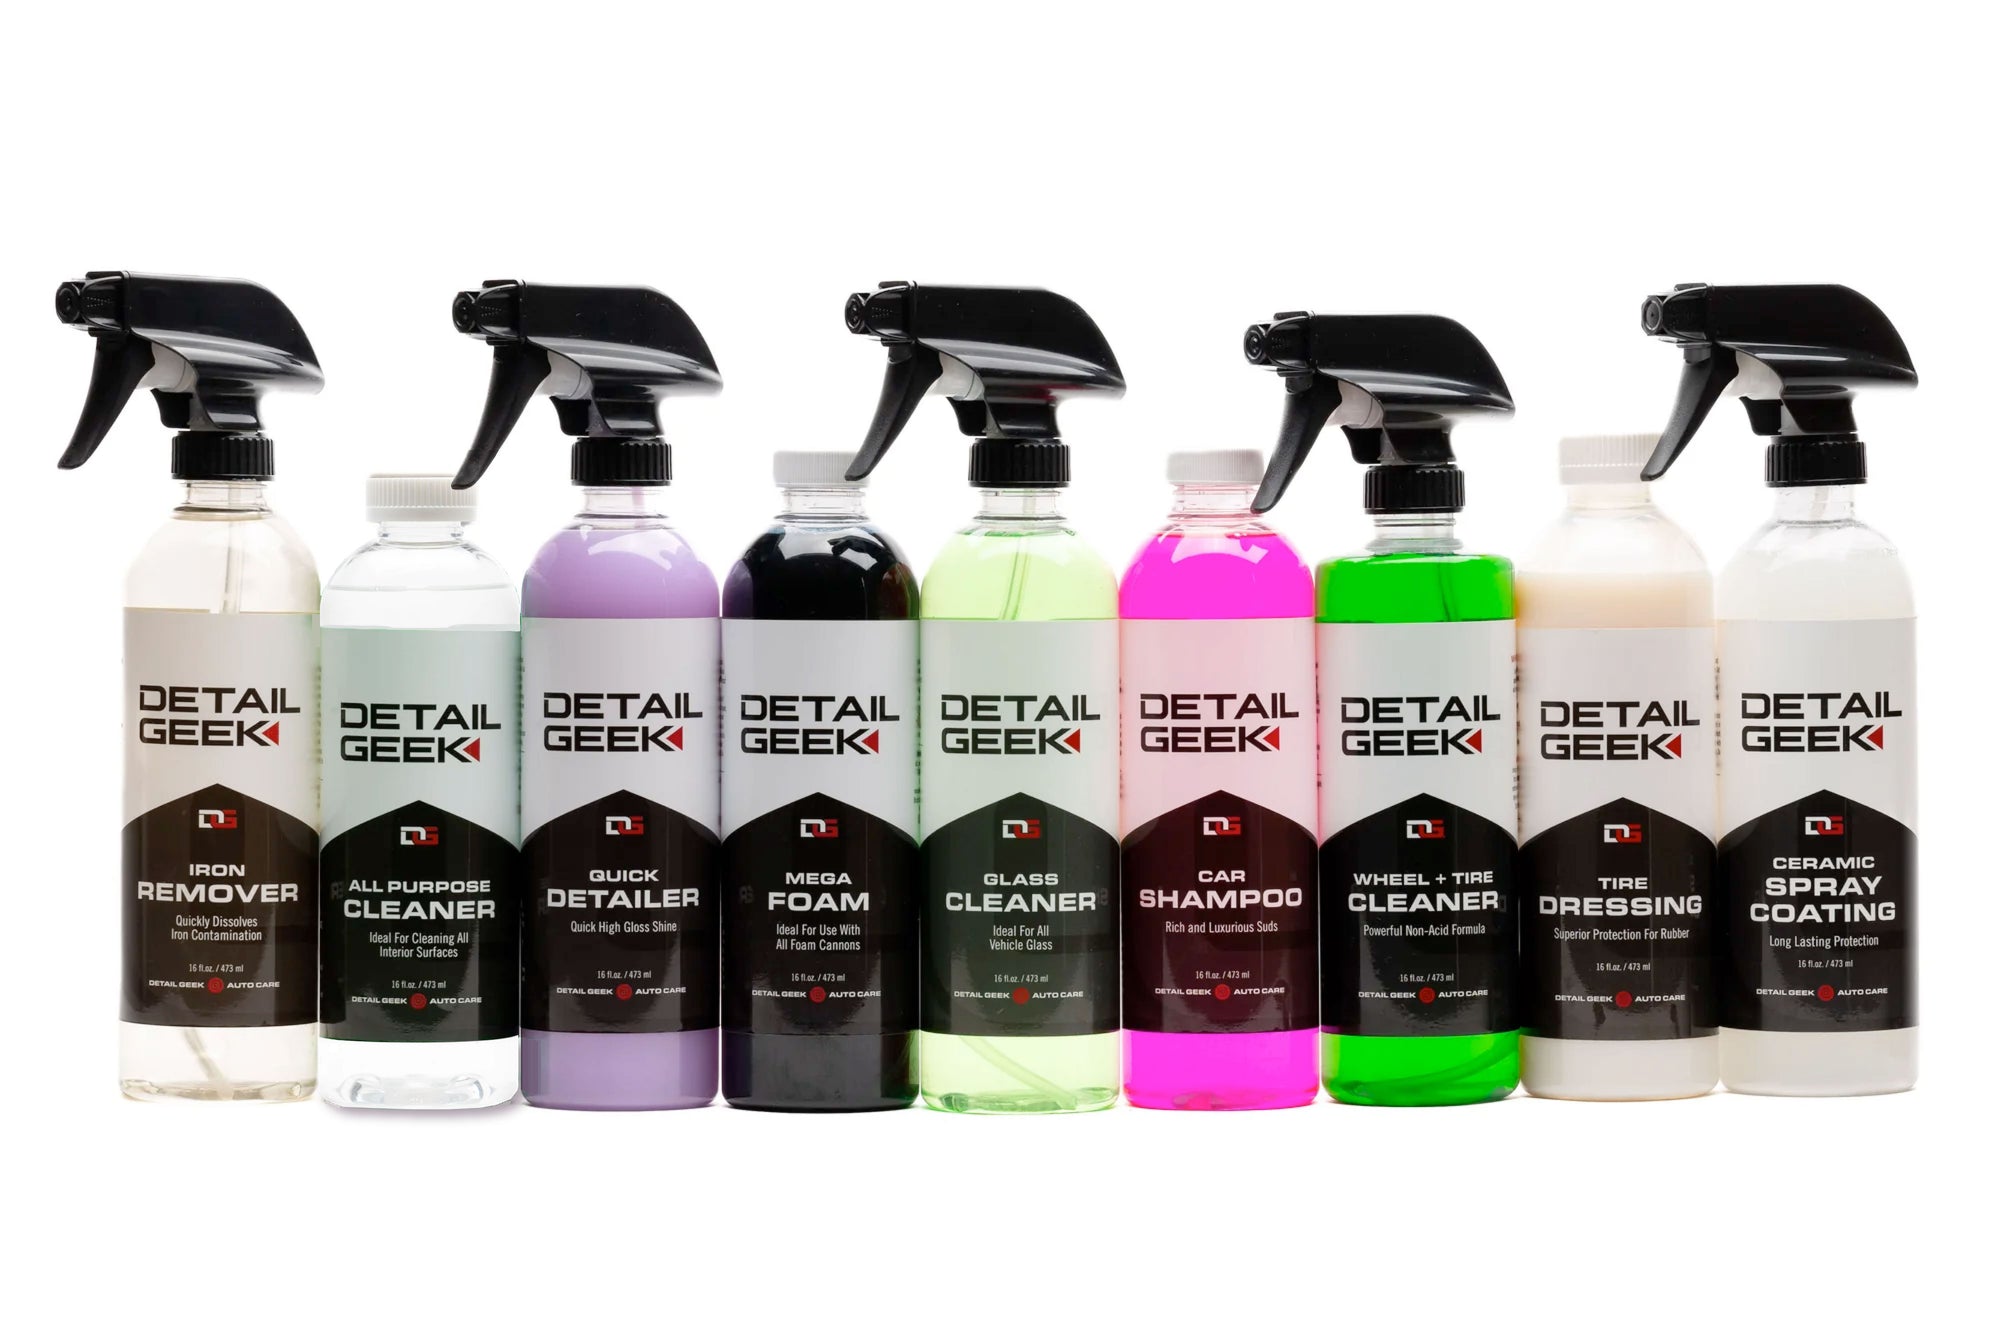 Chemical Guys Interior Detailing in Auto Detailing & Car Care